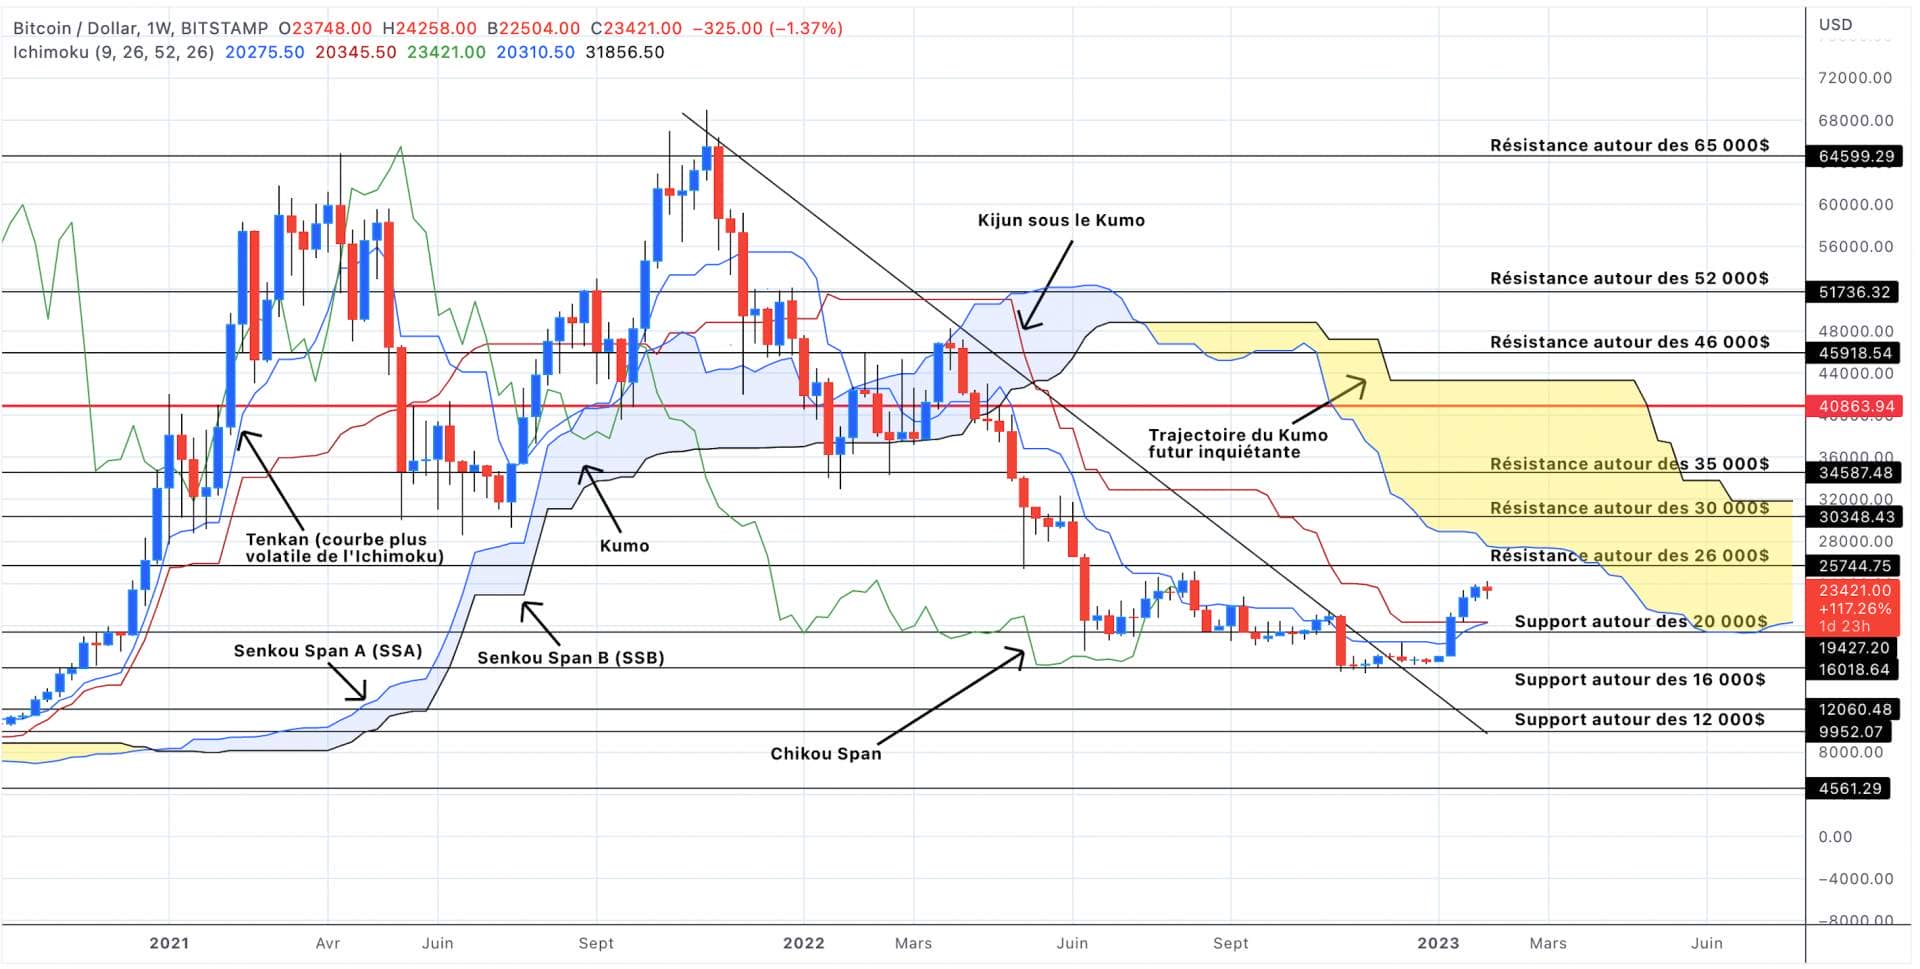 Bitcoin Price Analysis in Weekly Units - February 04, 2023